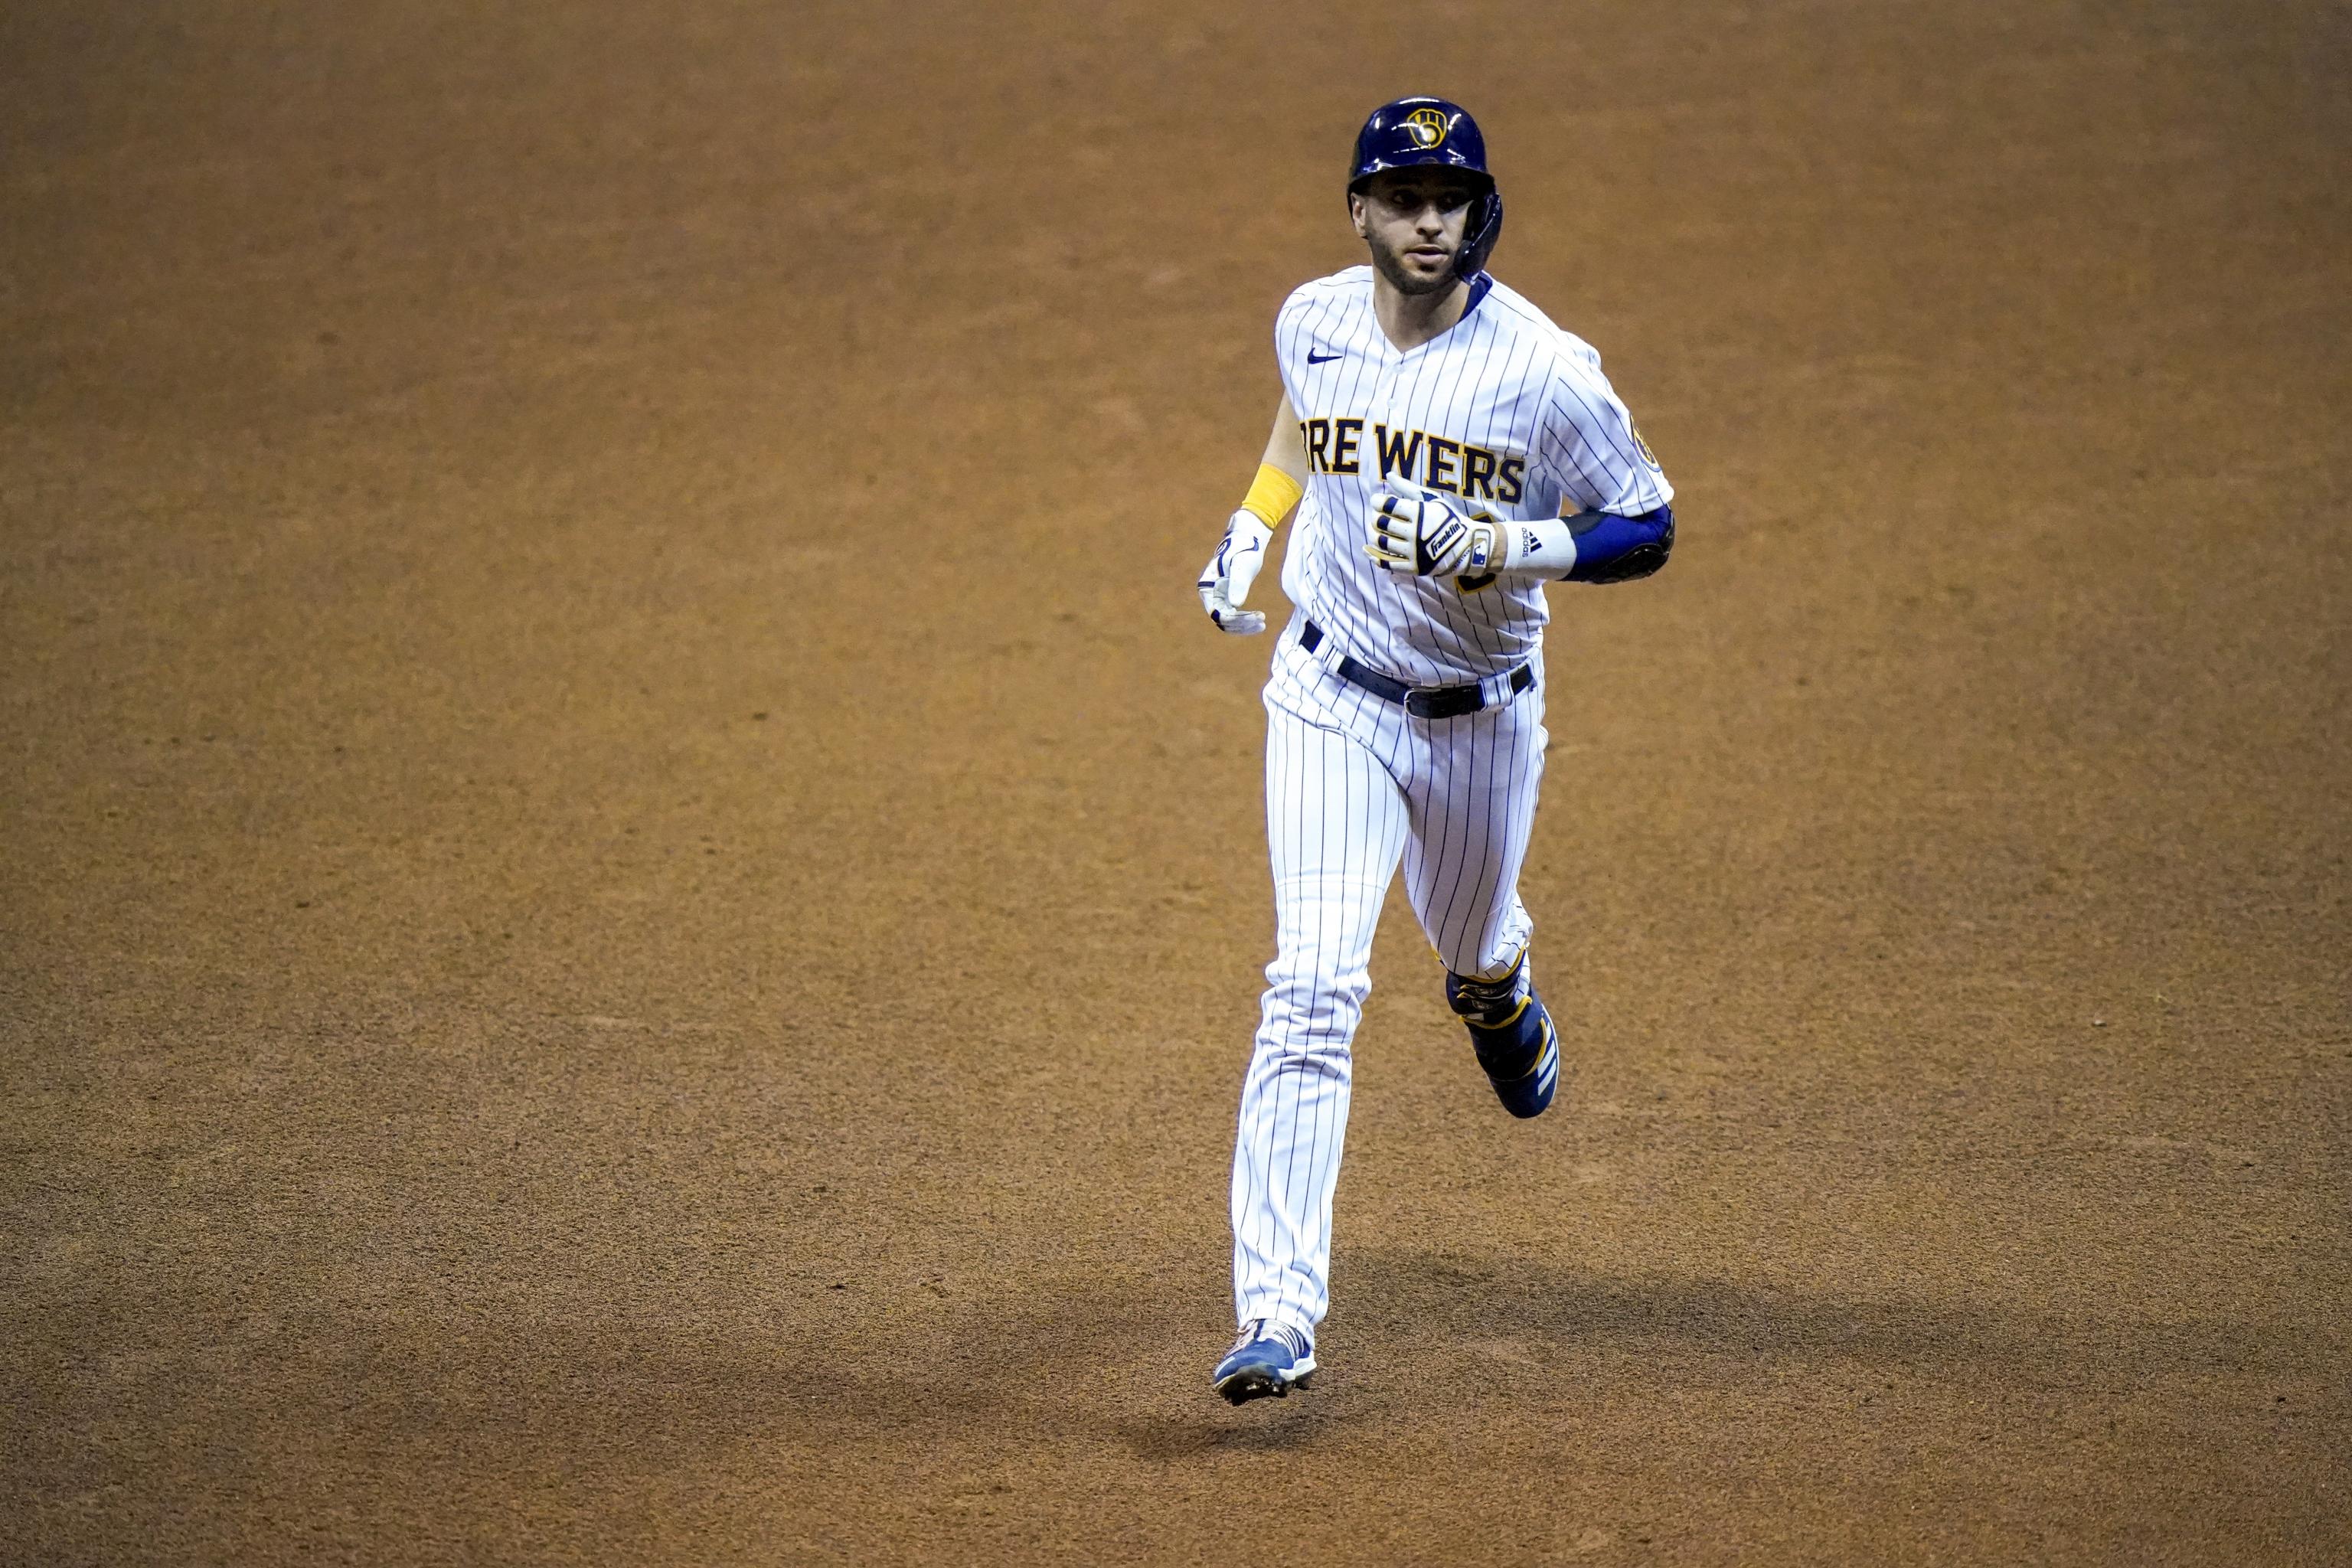 Ryan Braun officially announces his retirement from baseball